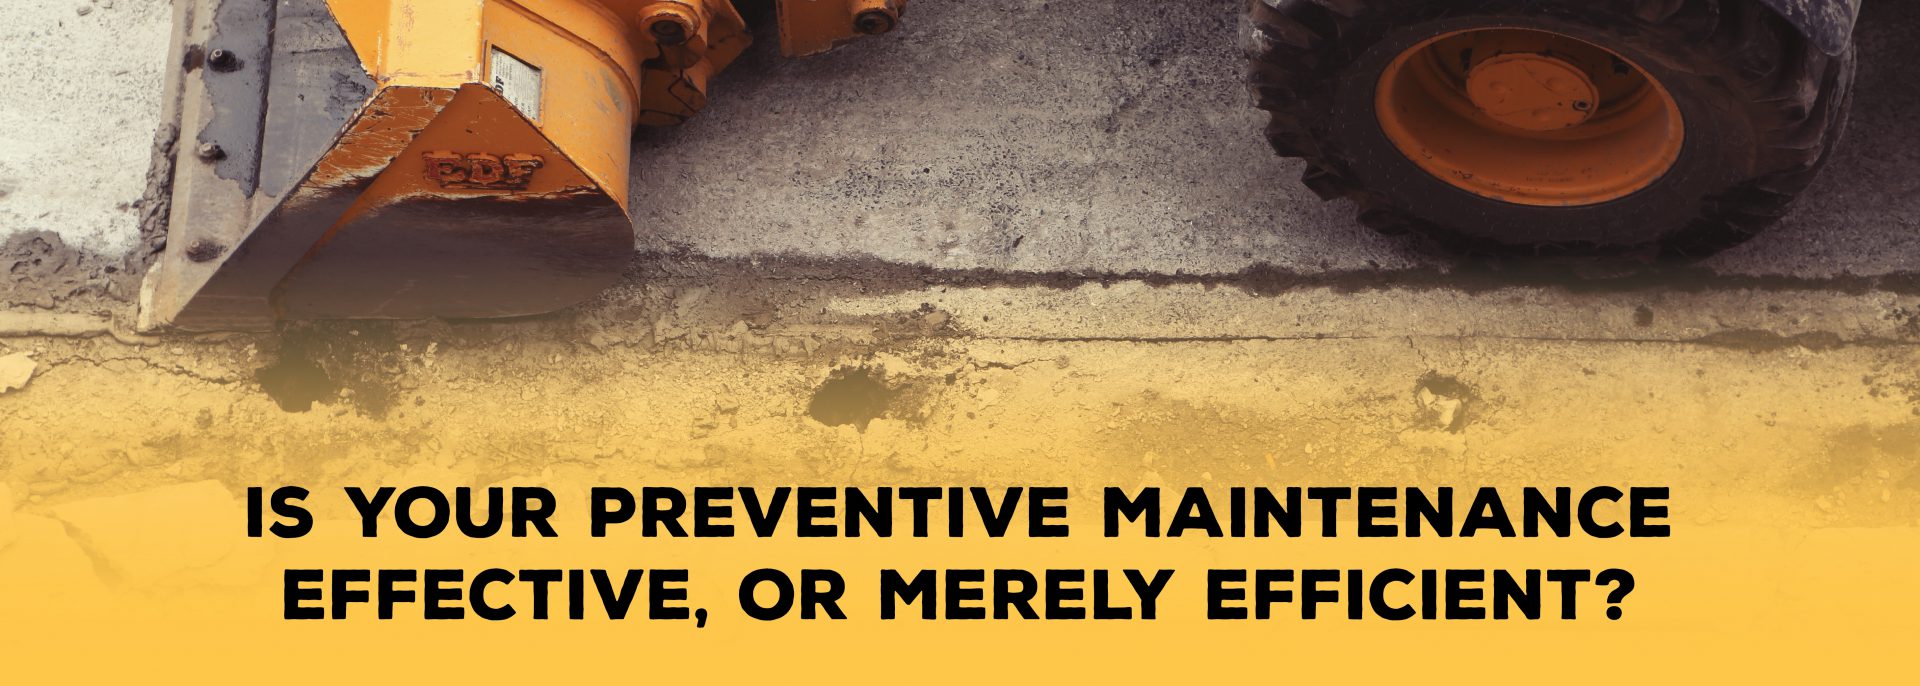 Is Your Preventive Maintenance Effective, or Merely Efficient | ADI Agency